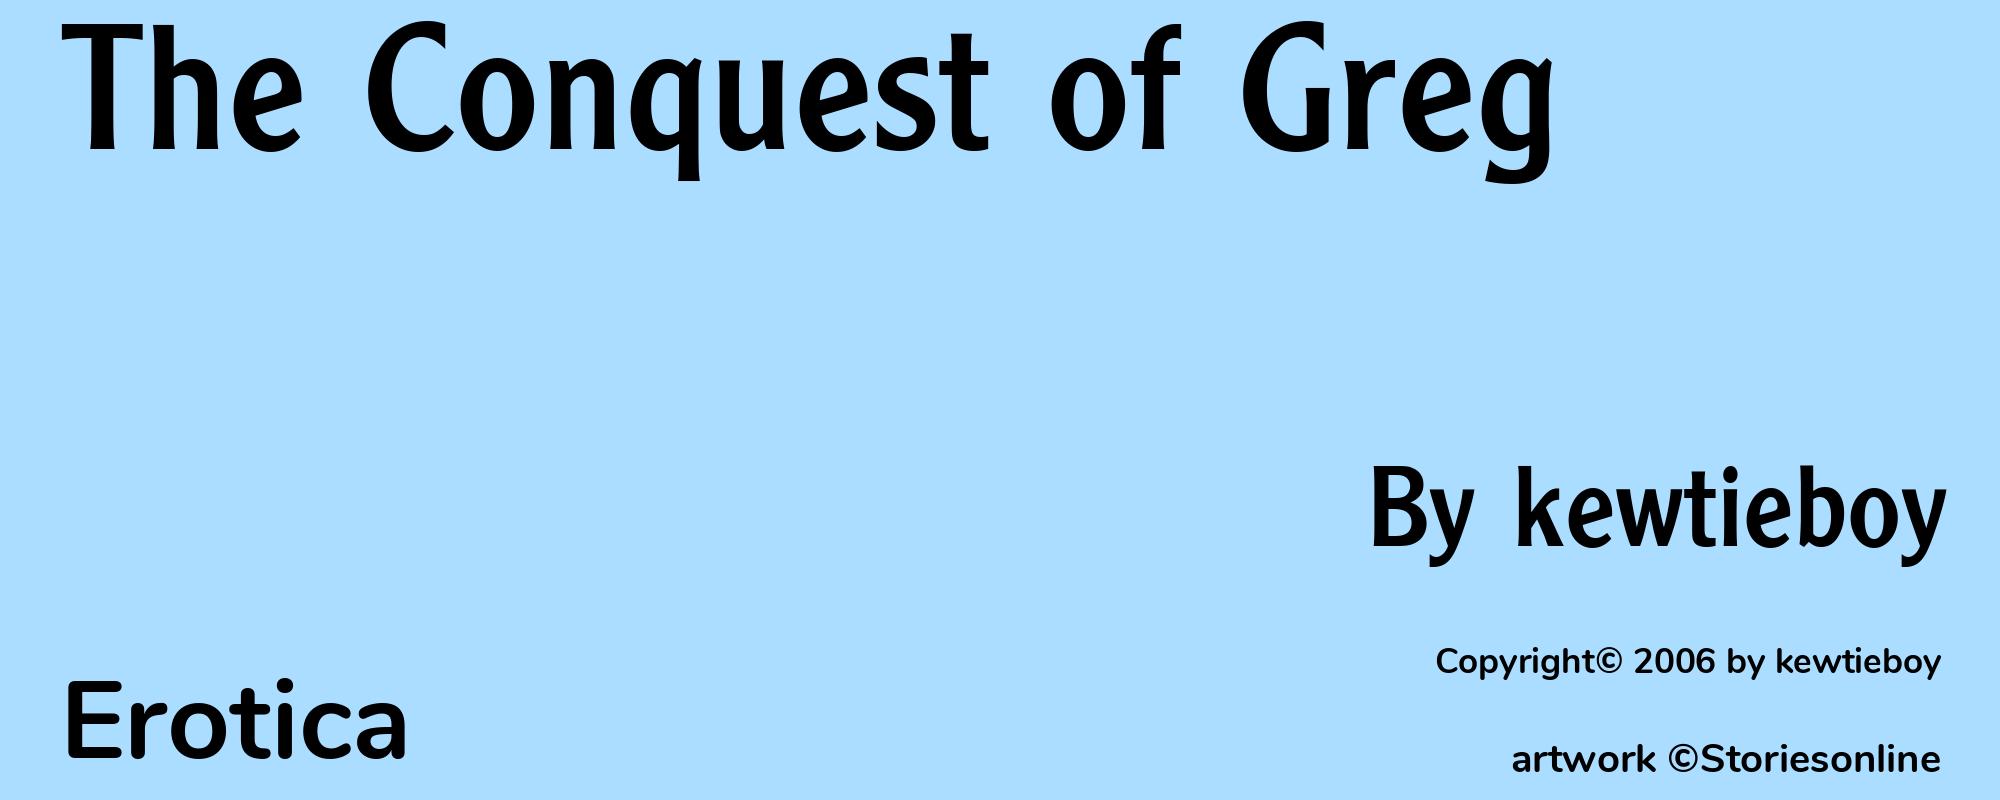 The Conquest of Greg - Cover